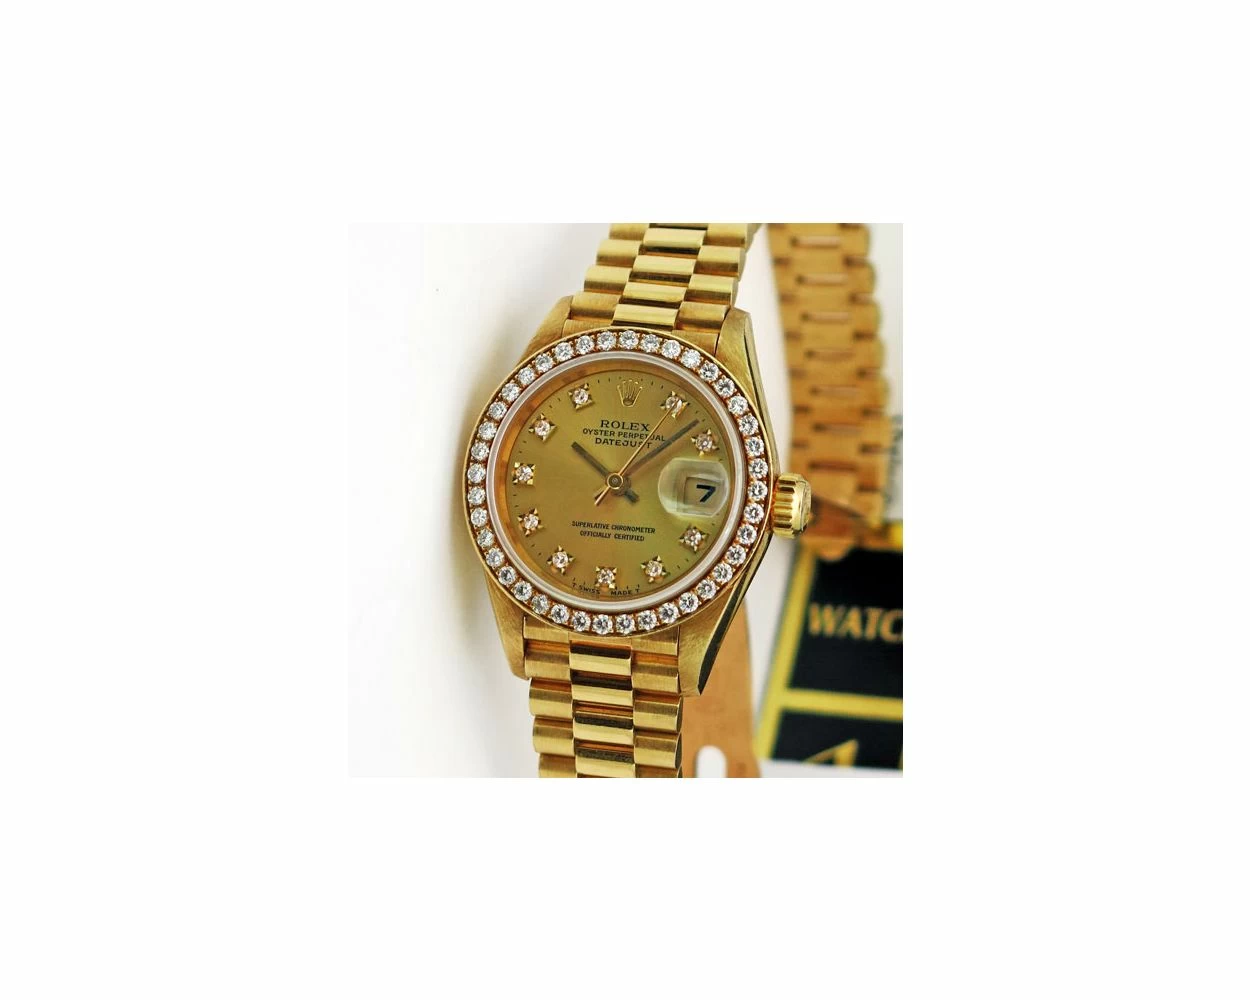 Rolex Datejust Watches His & Hers 18K Gold